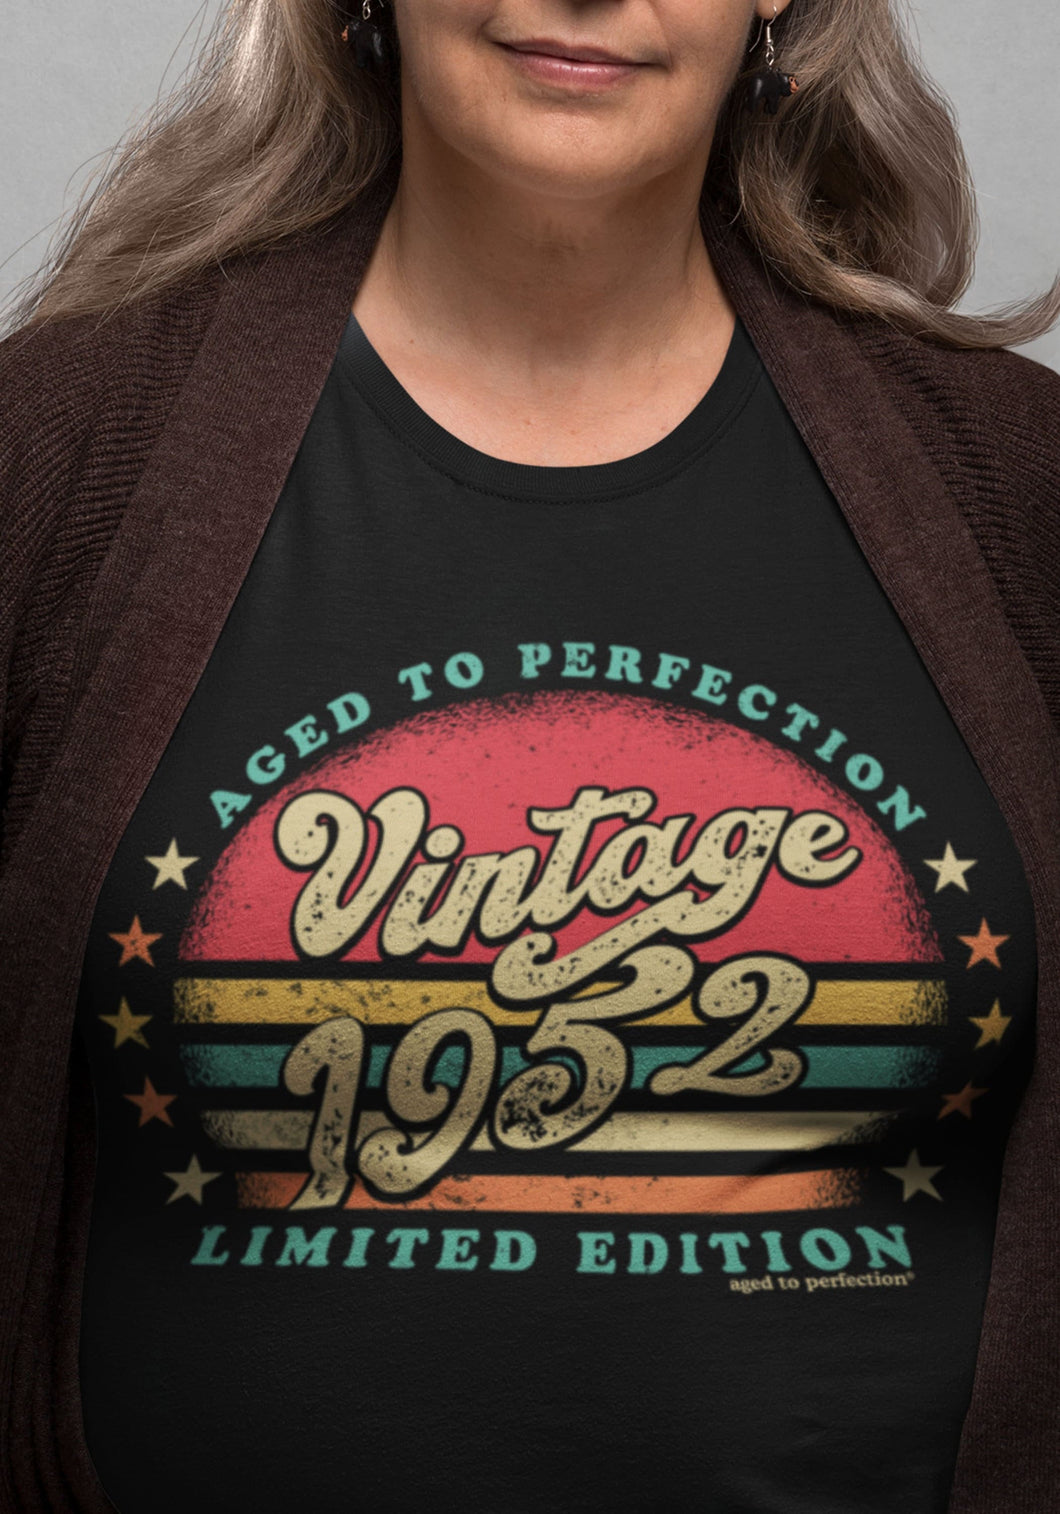 70th Birthday Retro Sunset Shirt For Her - Women born in 1952 - Vintage 1952 Aged To Perfection Limited Edition T-shirt Gift idea  SUN-1952